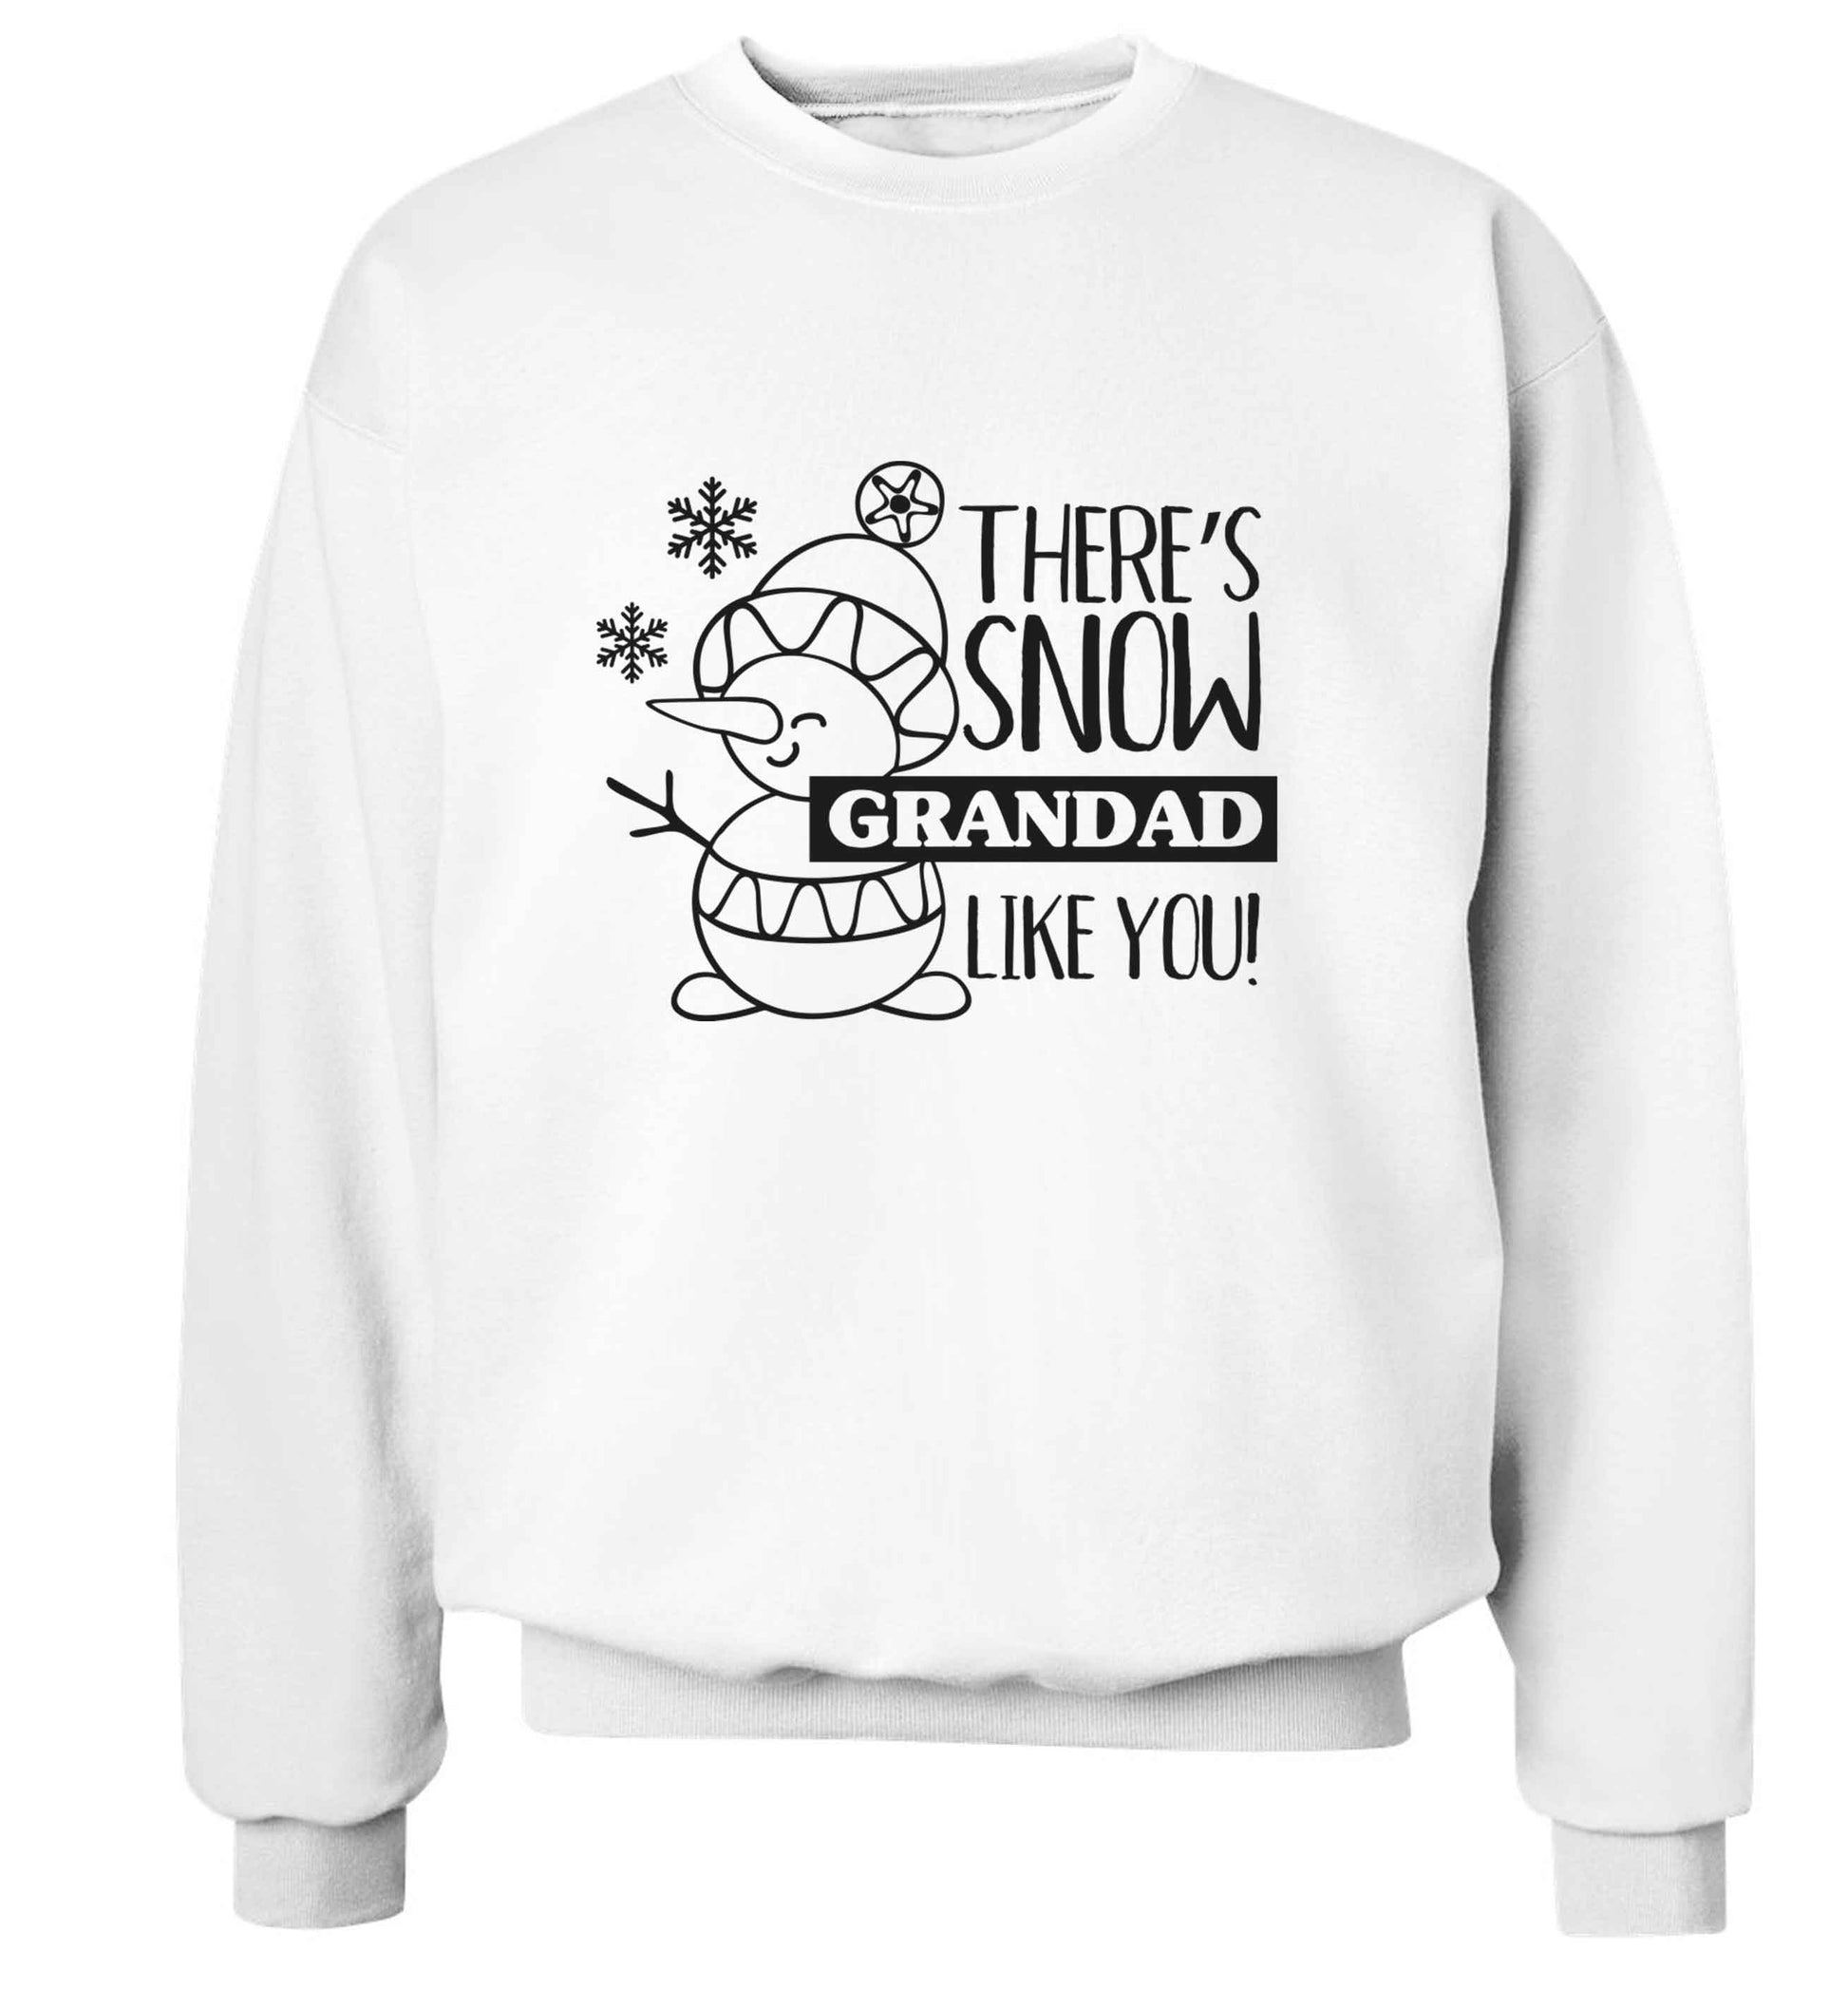 There's snow grandad like you adult's unisex white sweater 2XL